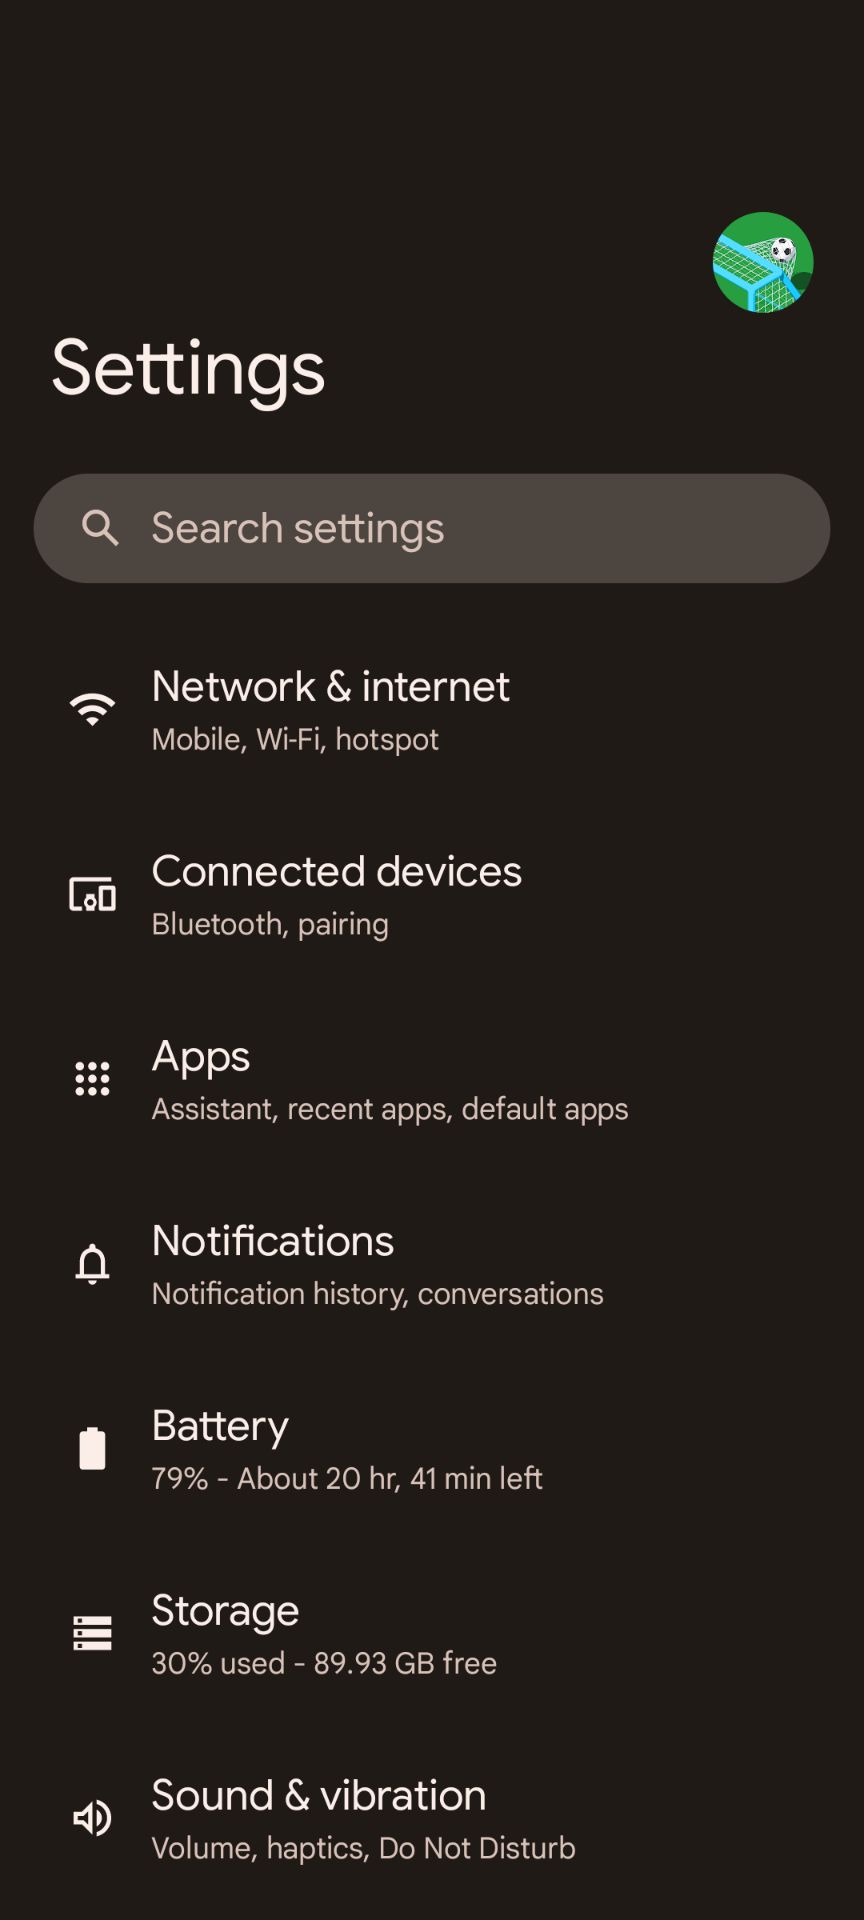 The Settings app main screen on an Android phone